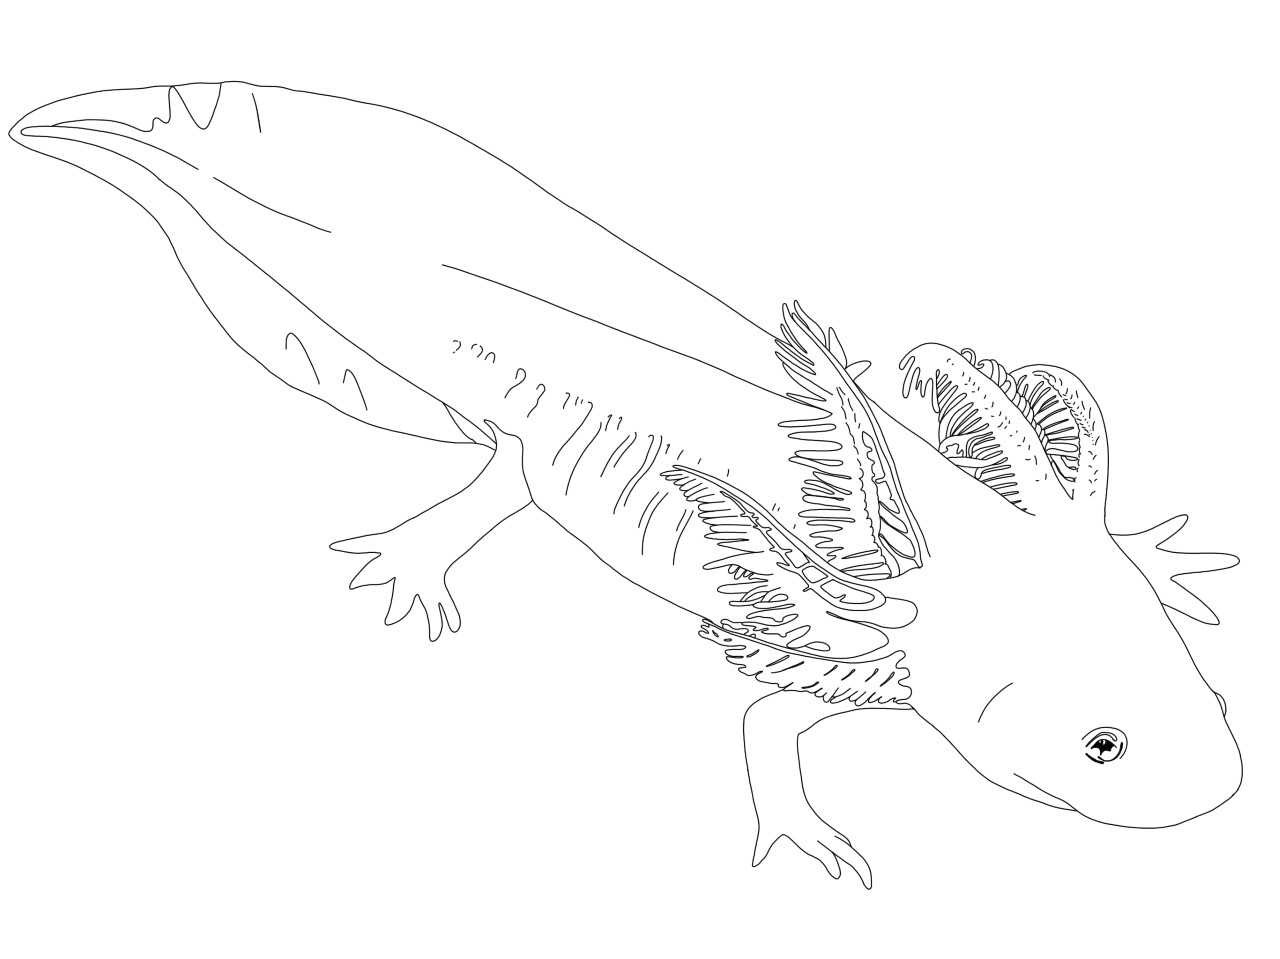 Axolotl Coloring Pages to Print - Realistic Axolotl Coloring Pages